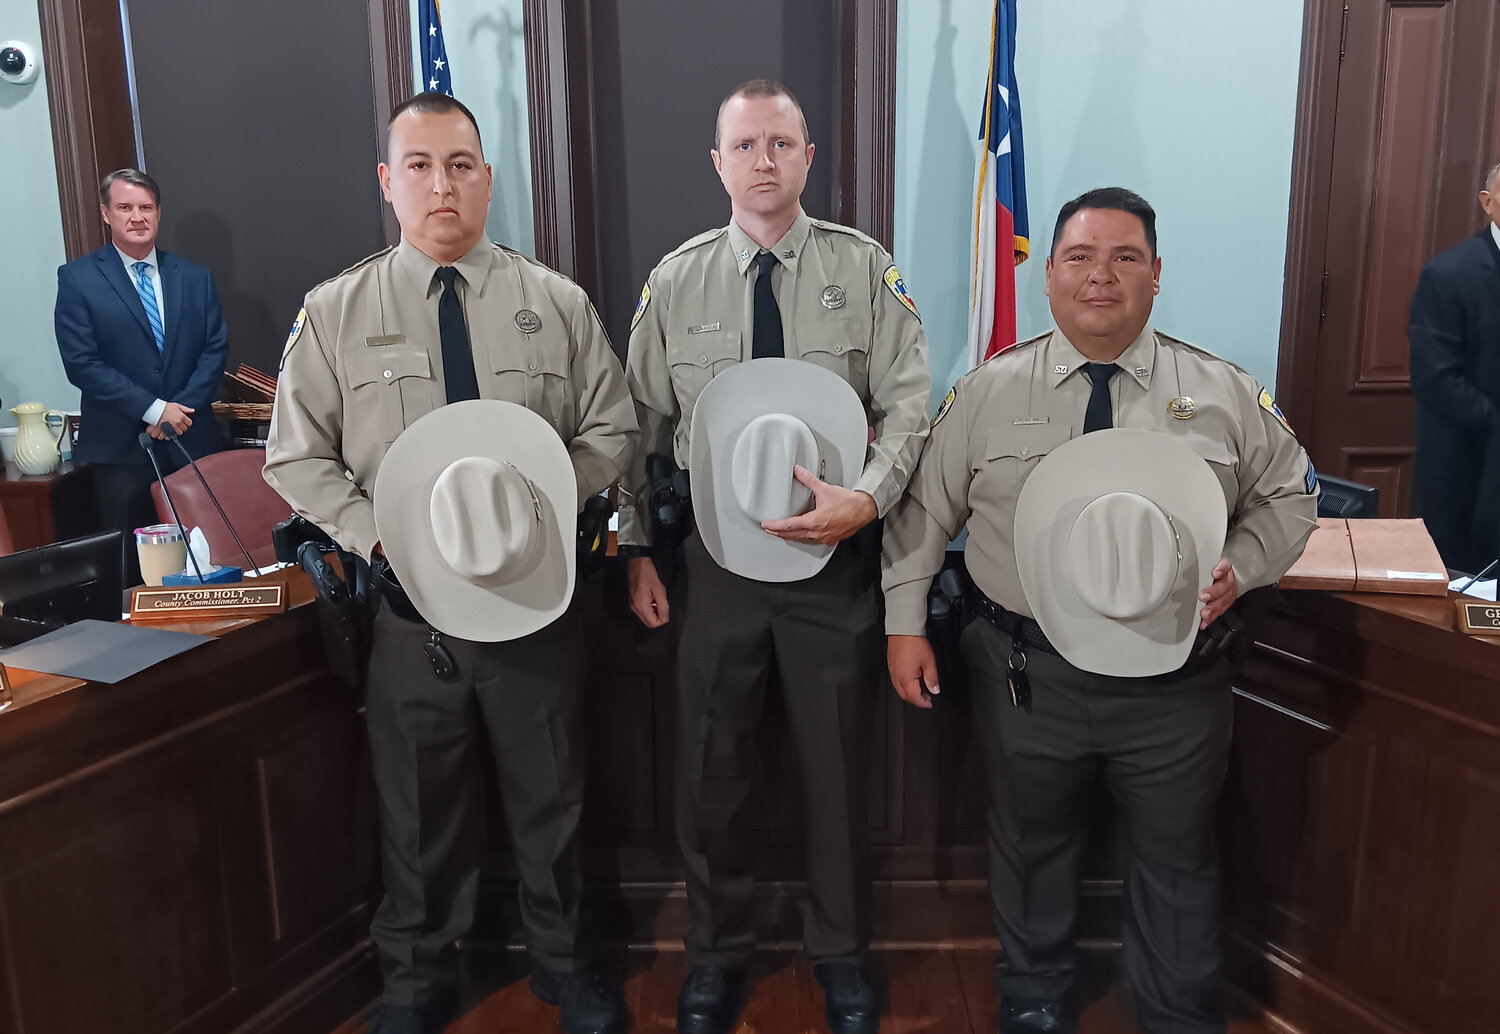 Parker County Sheriff’s Deputies (from left) Joseph evans, Randy Lawson and Corporal Luis Montanez were recently awarded with the Life-Saving Award during a Parker County Commissioners Court session. They received the honor after saving the life of a suspect following a shootout.